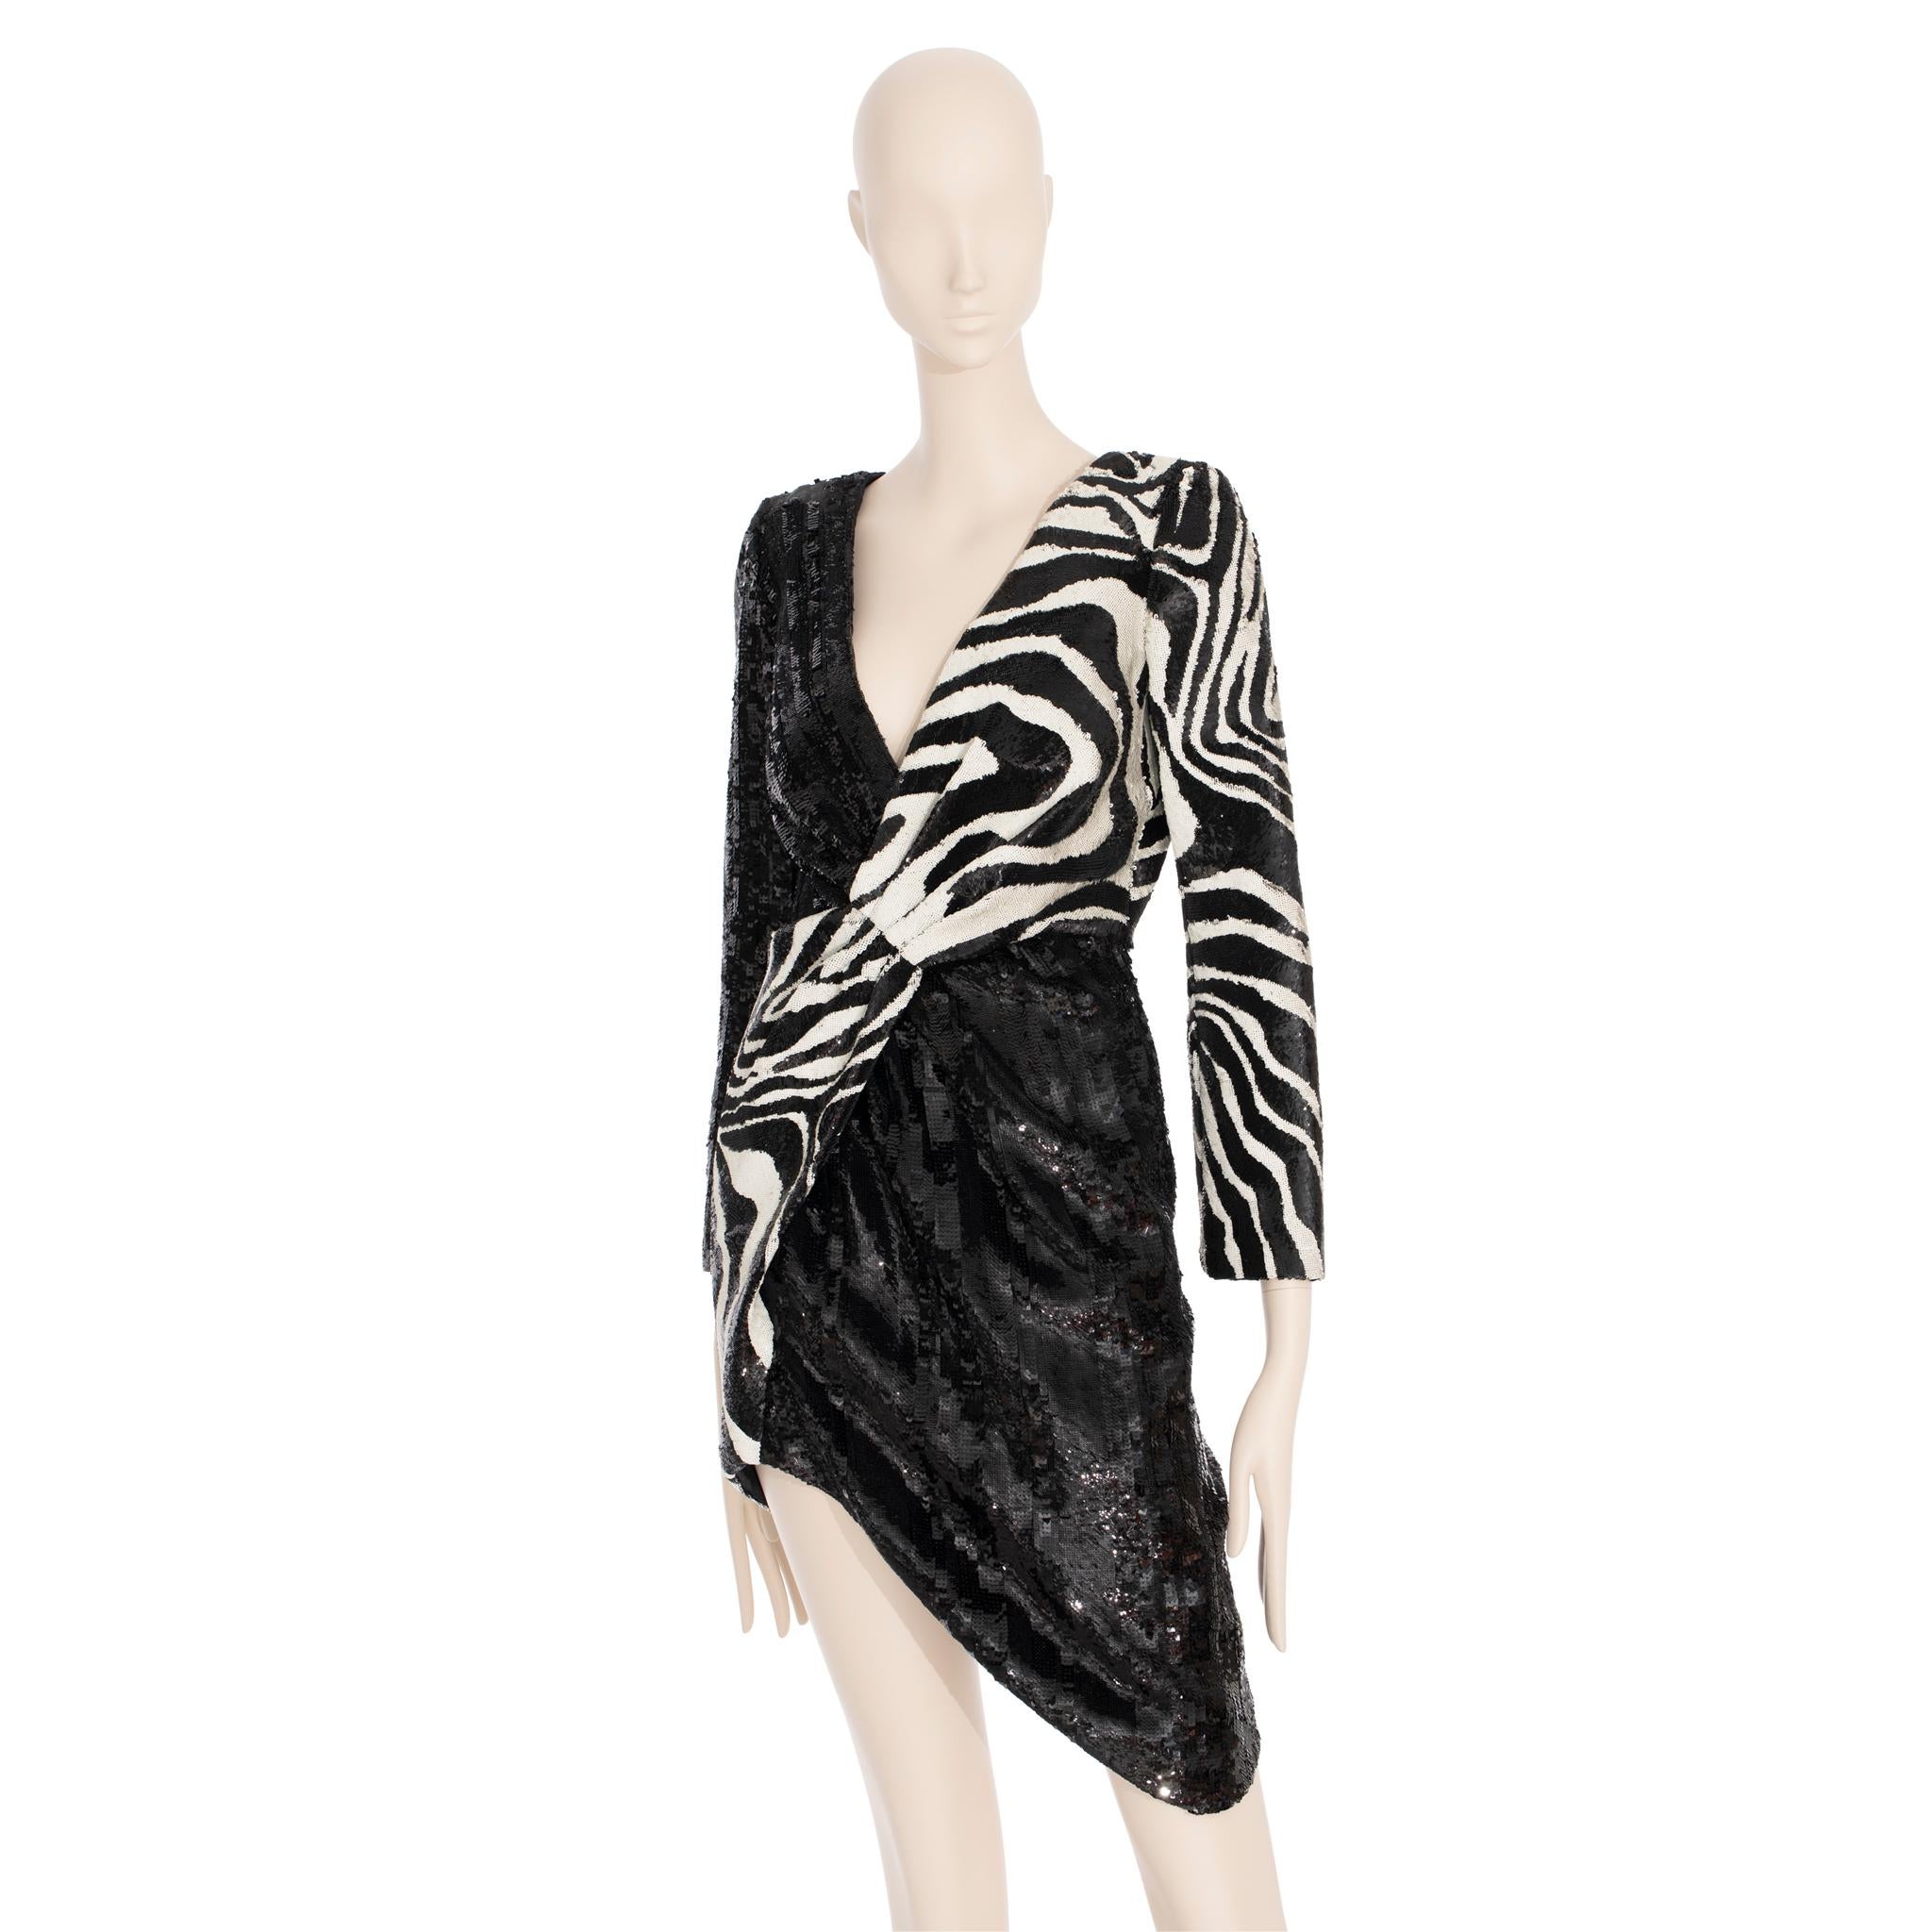 Saint Laurent by Hedi Slimane Asymmetric Zebra Print Sequin Dress 36 FR In New Condition For Sale In DOUBLE BAY, NSW